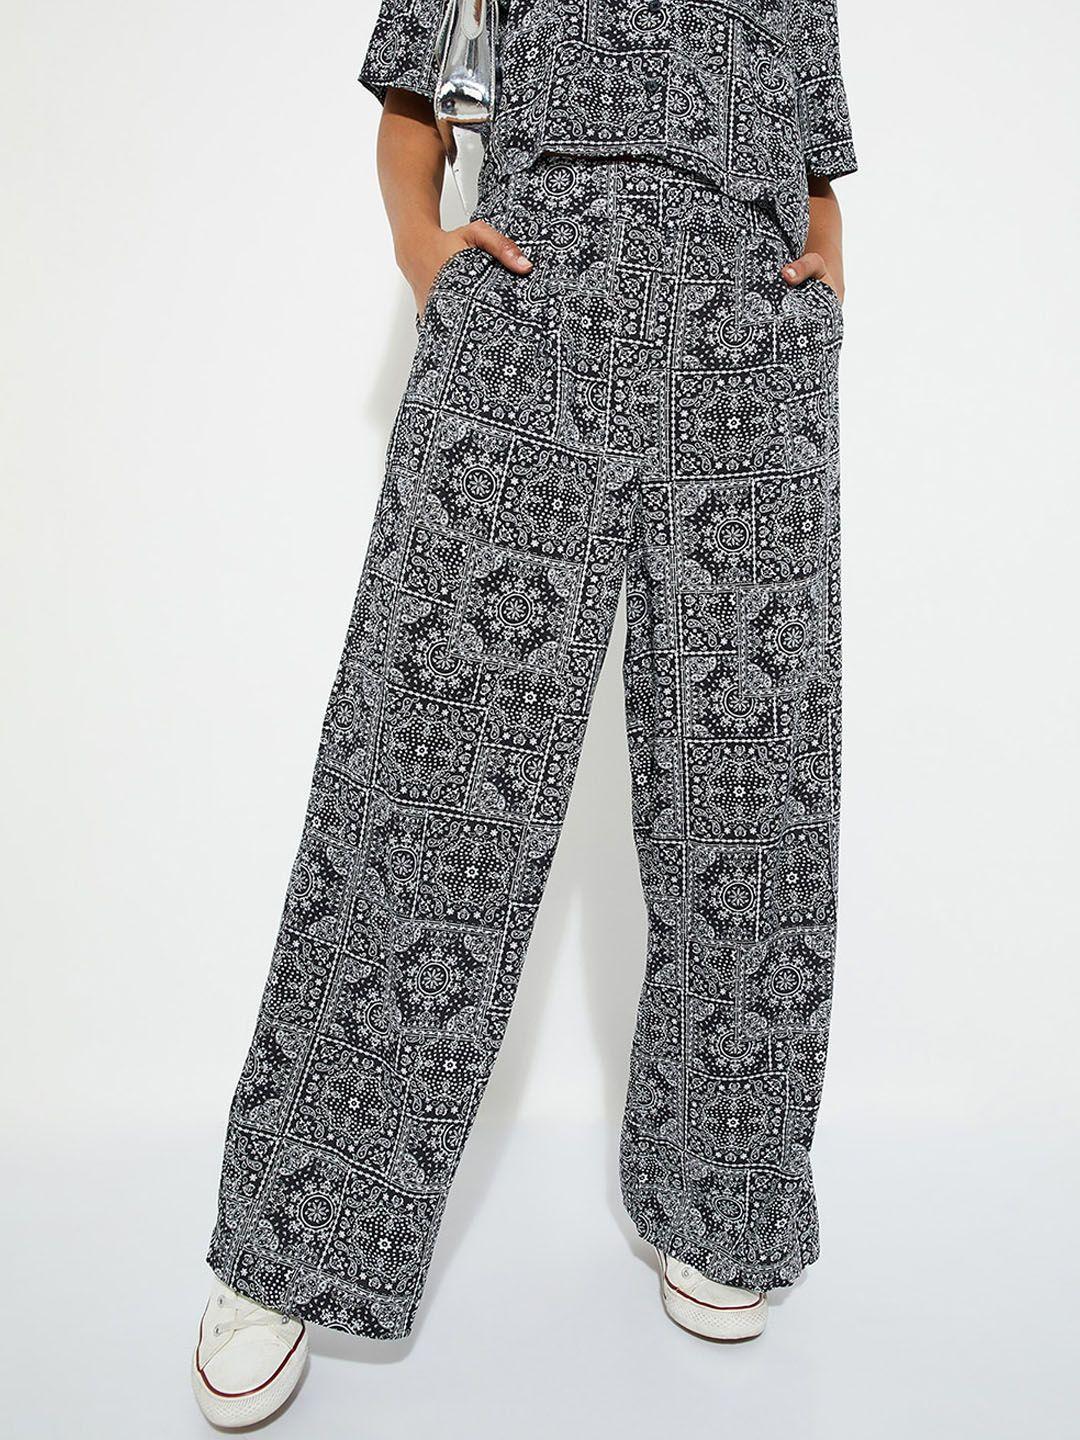 max Women Printed Trousers